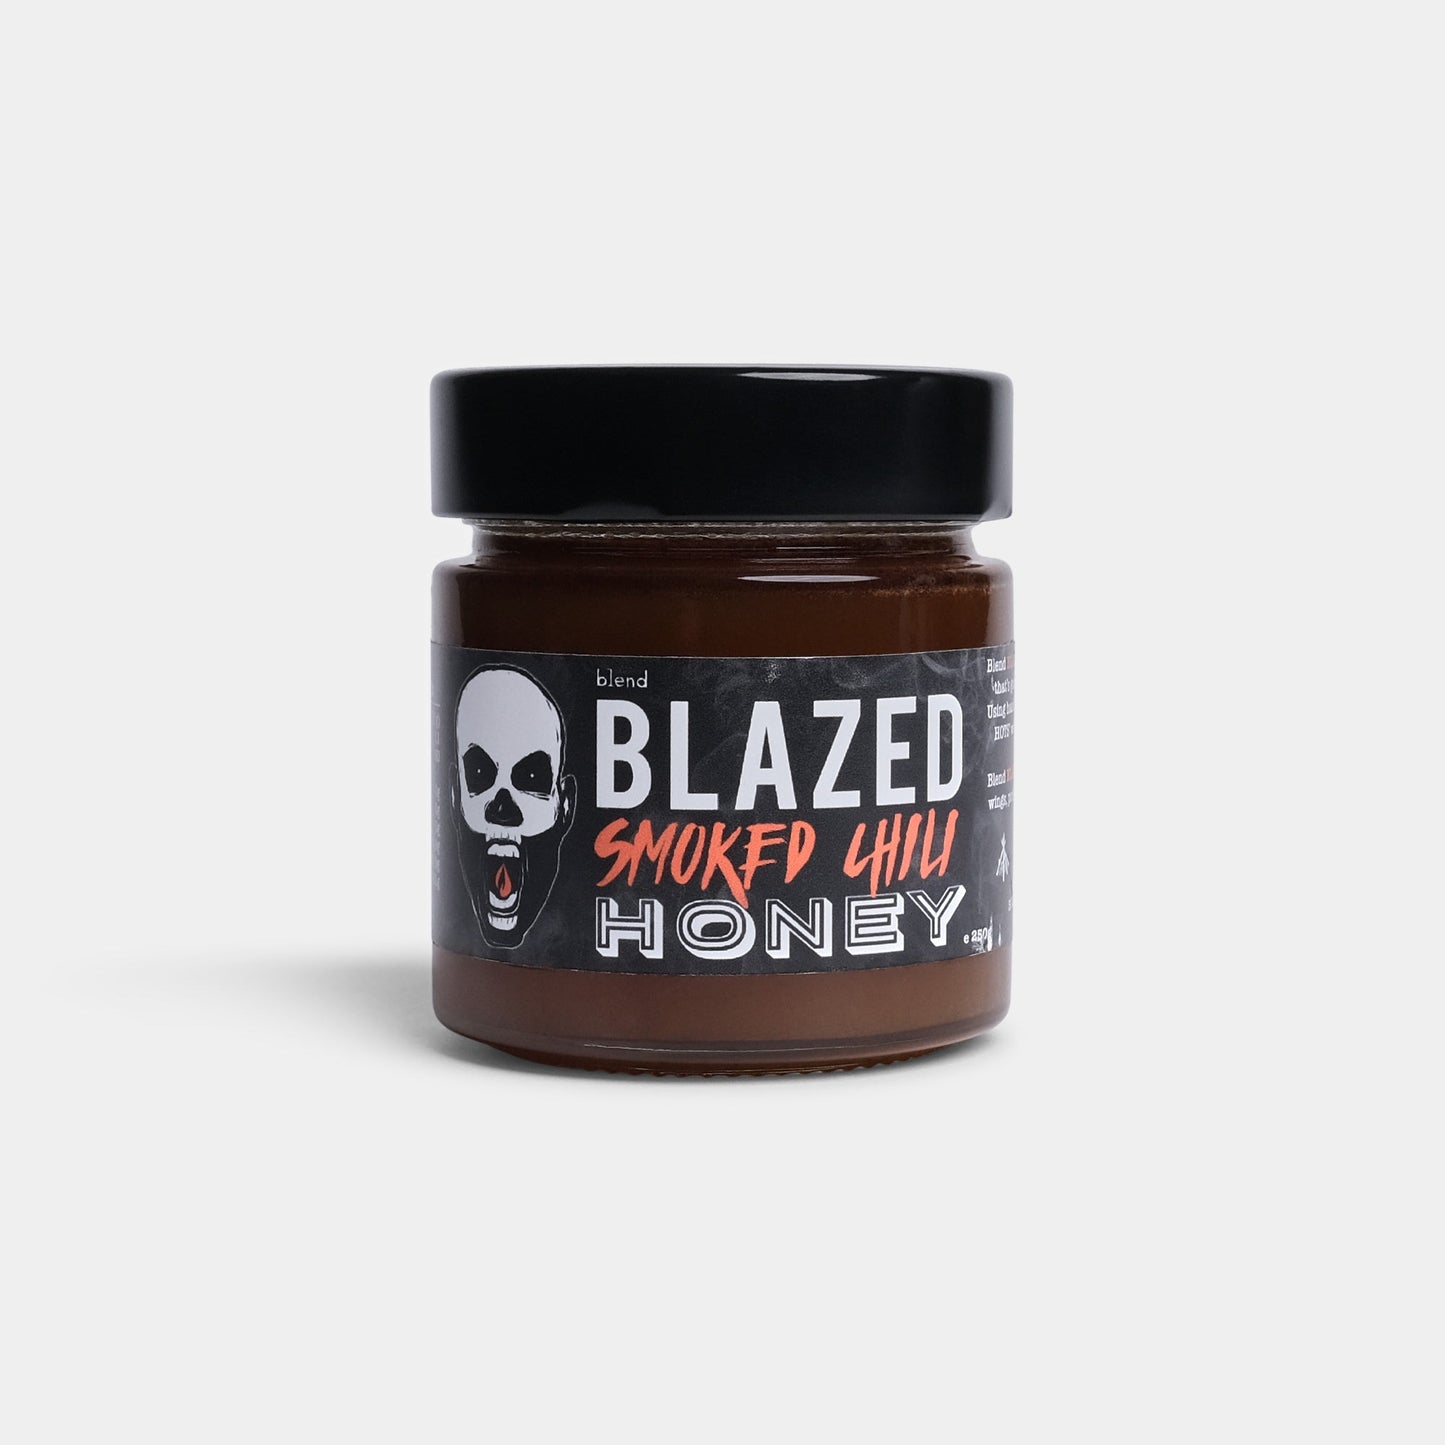 Small Batch Providore - Blended Blazed Smoked Chilli Honey - front view